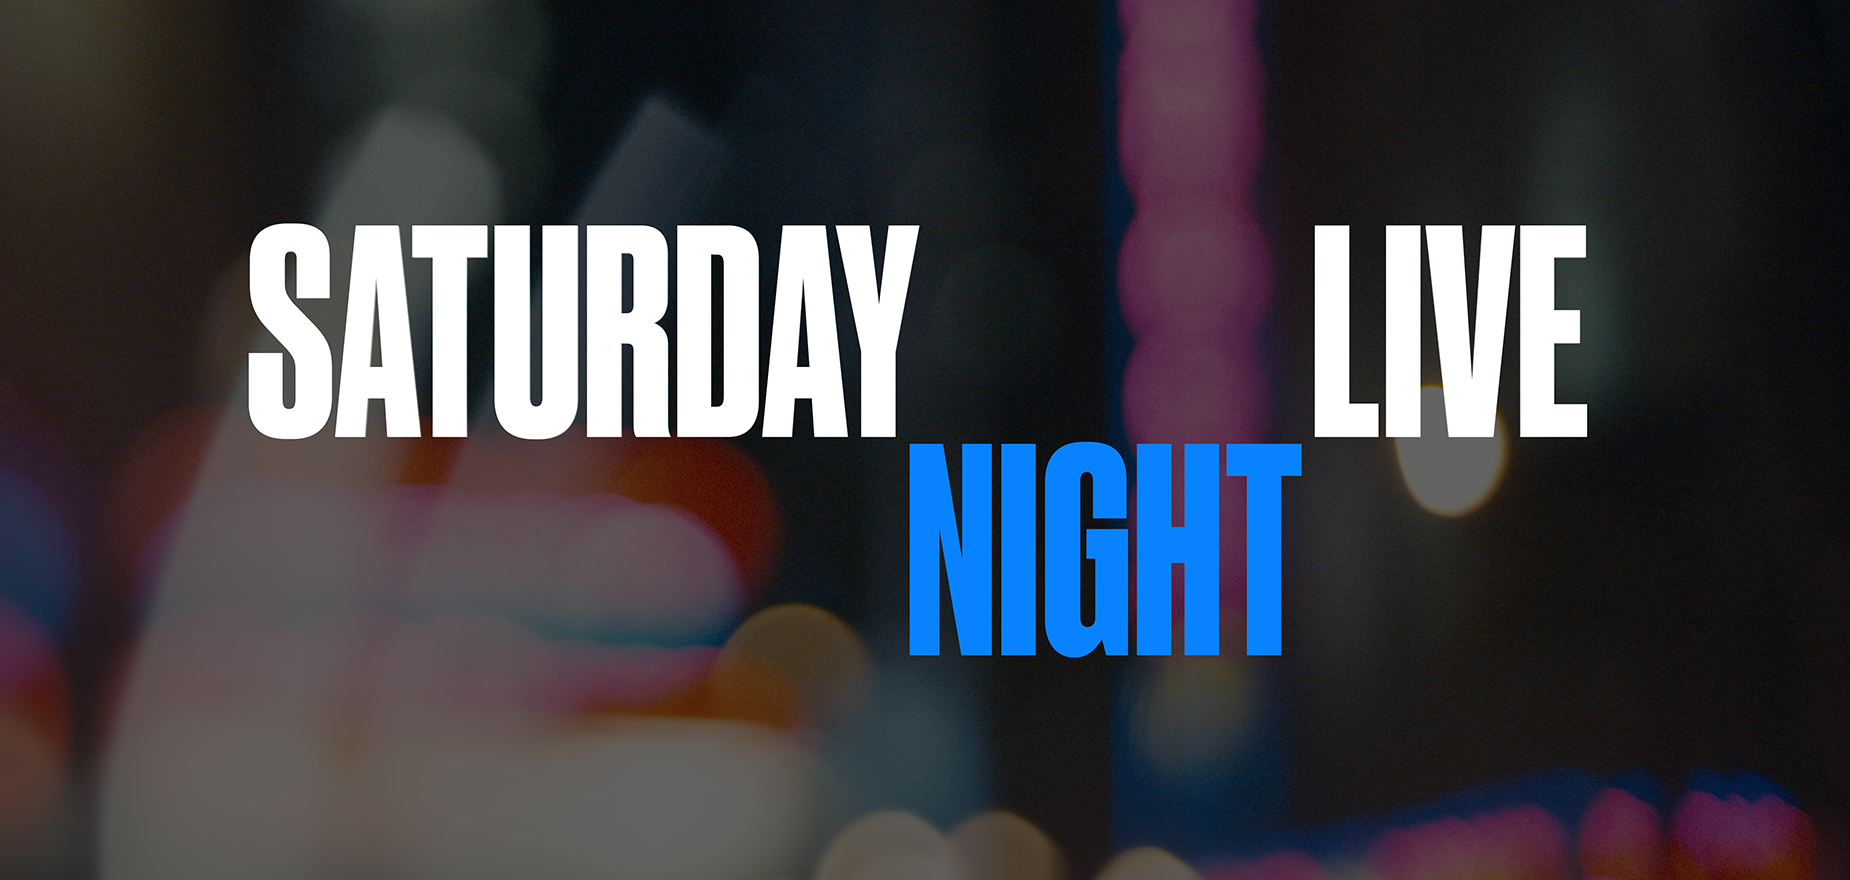 Saturday Night Live: Political Satire 2017 - SNL Studios in association with Universal Television and Broadway Video